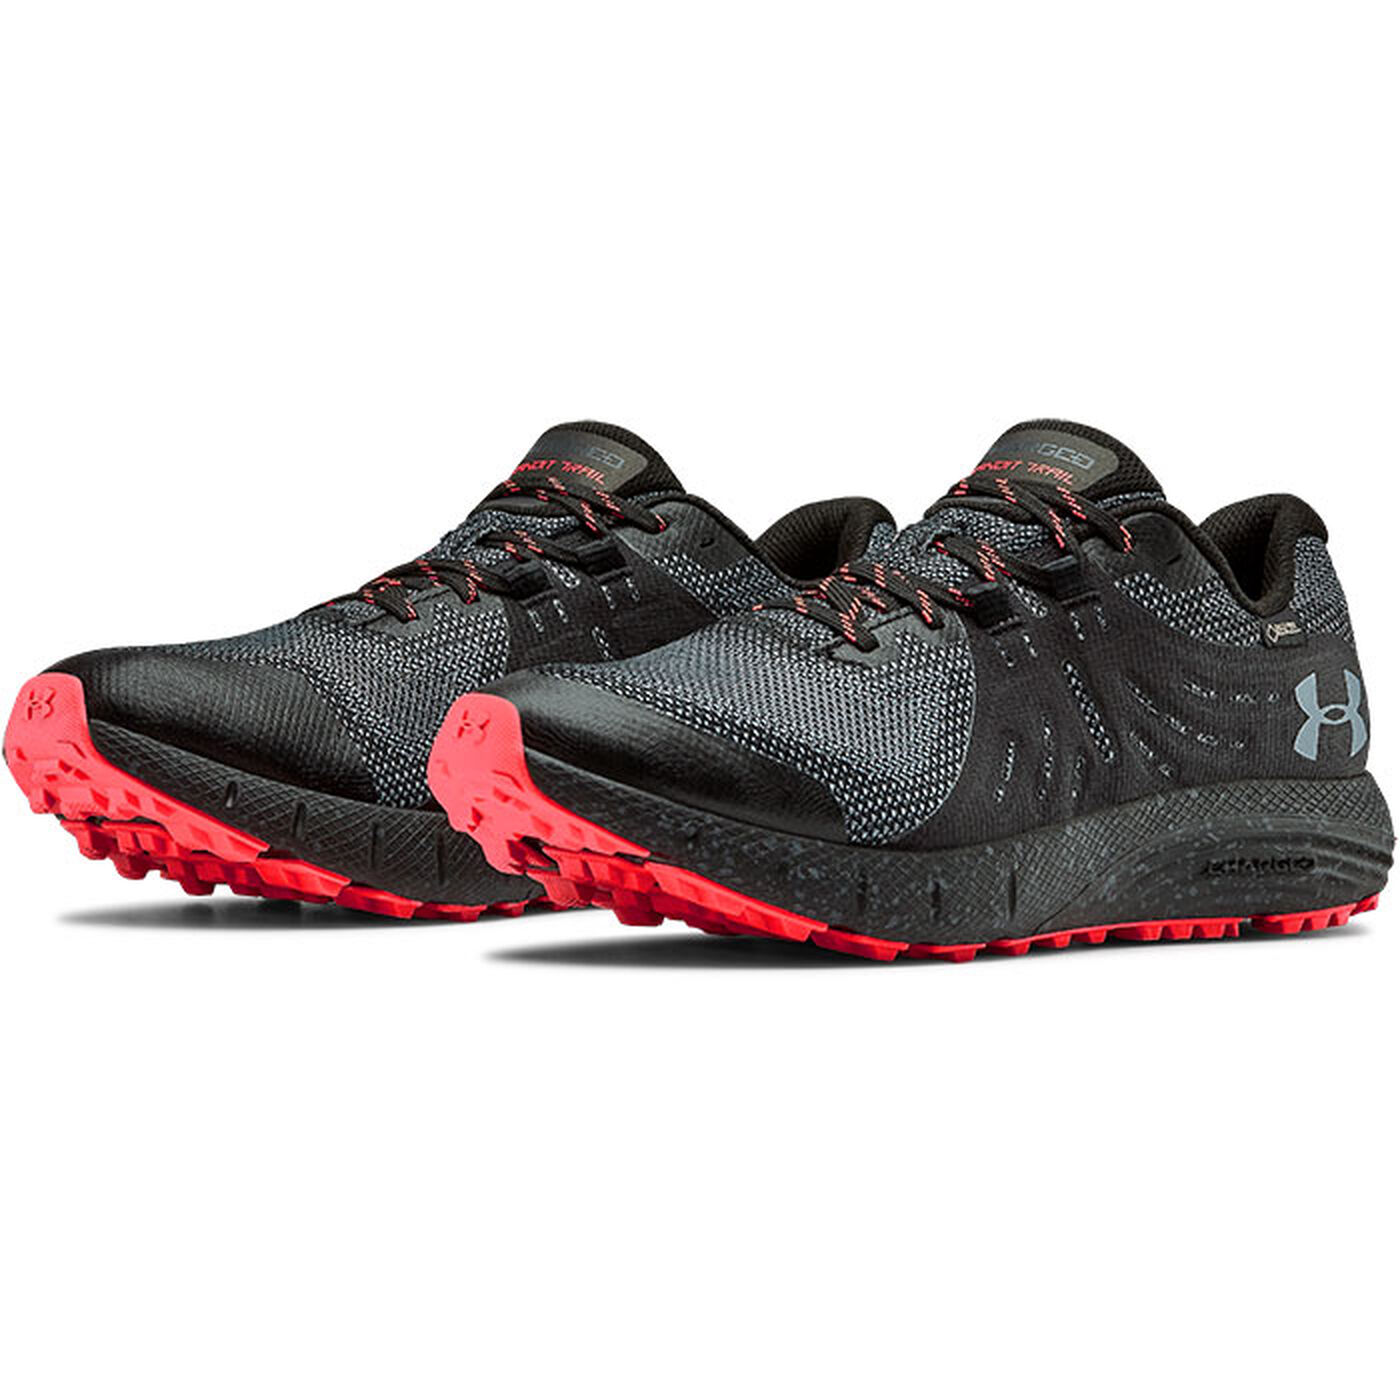 Men's Charged Bandit Trail GORE-TEX® Running Shoe | Sporting Life Online